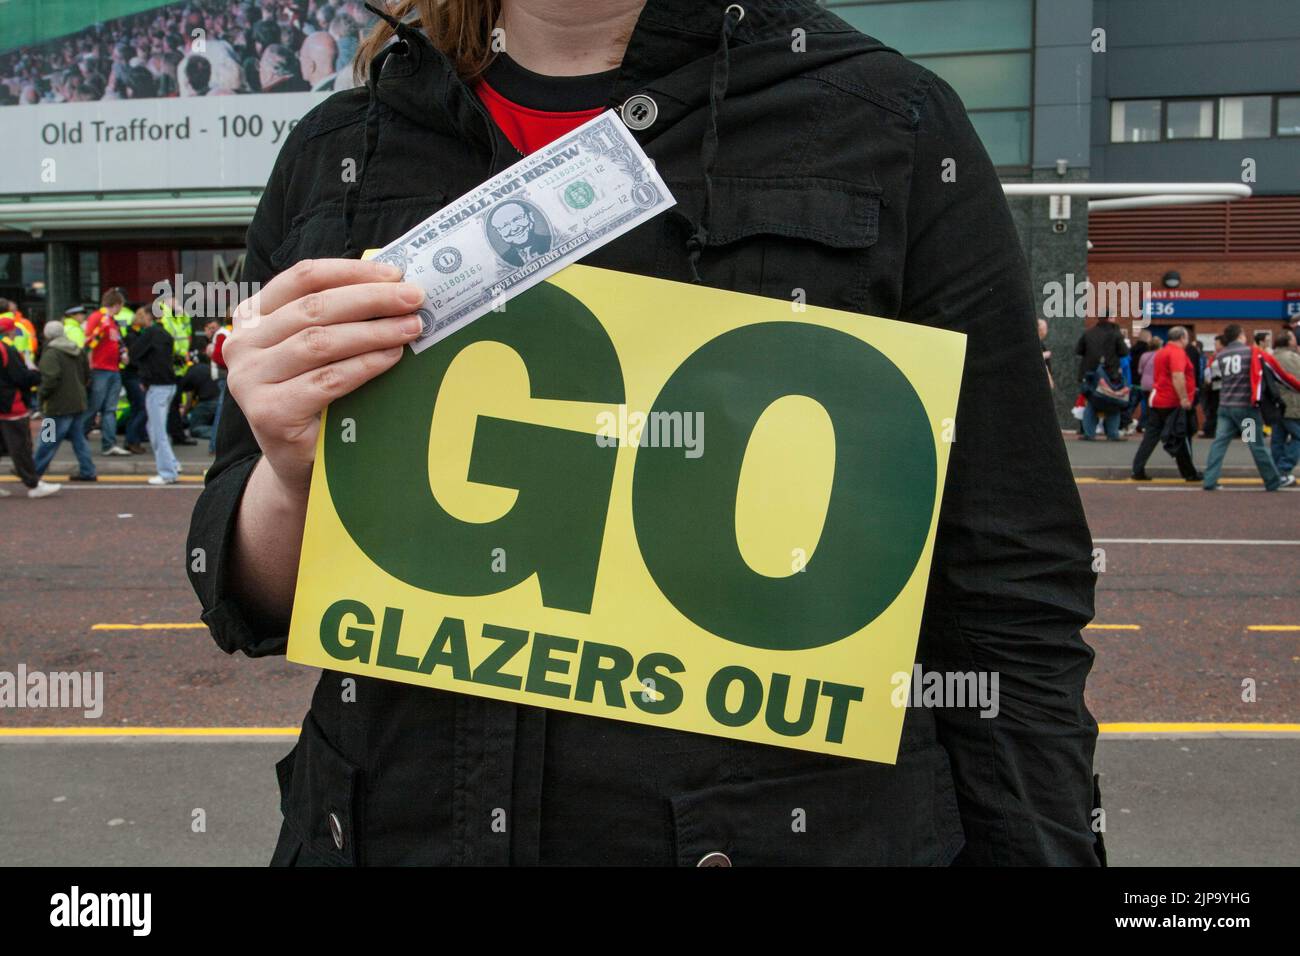 ANTI-GLAZER DEMONSTRATIONS OUTSIDE OLD TRAFFORD, MANCHESTER, UK - MAY 2010. Stock Photo